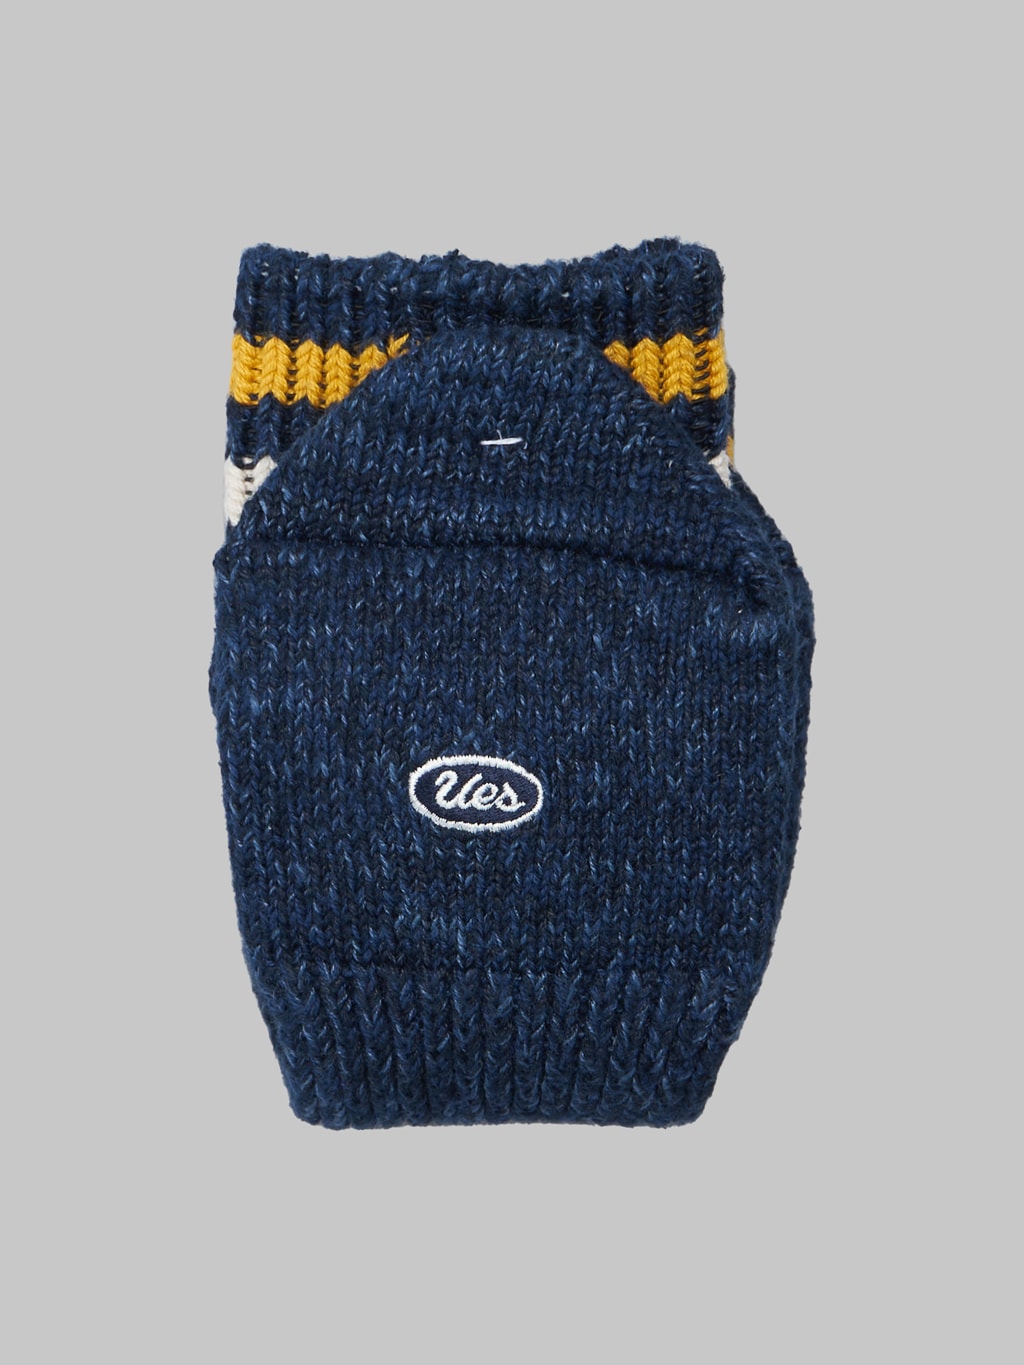 UES Sneakers Socks Navy and Yellow logo